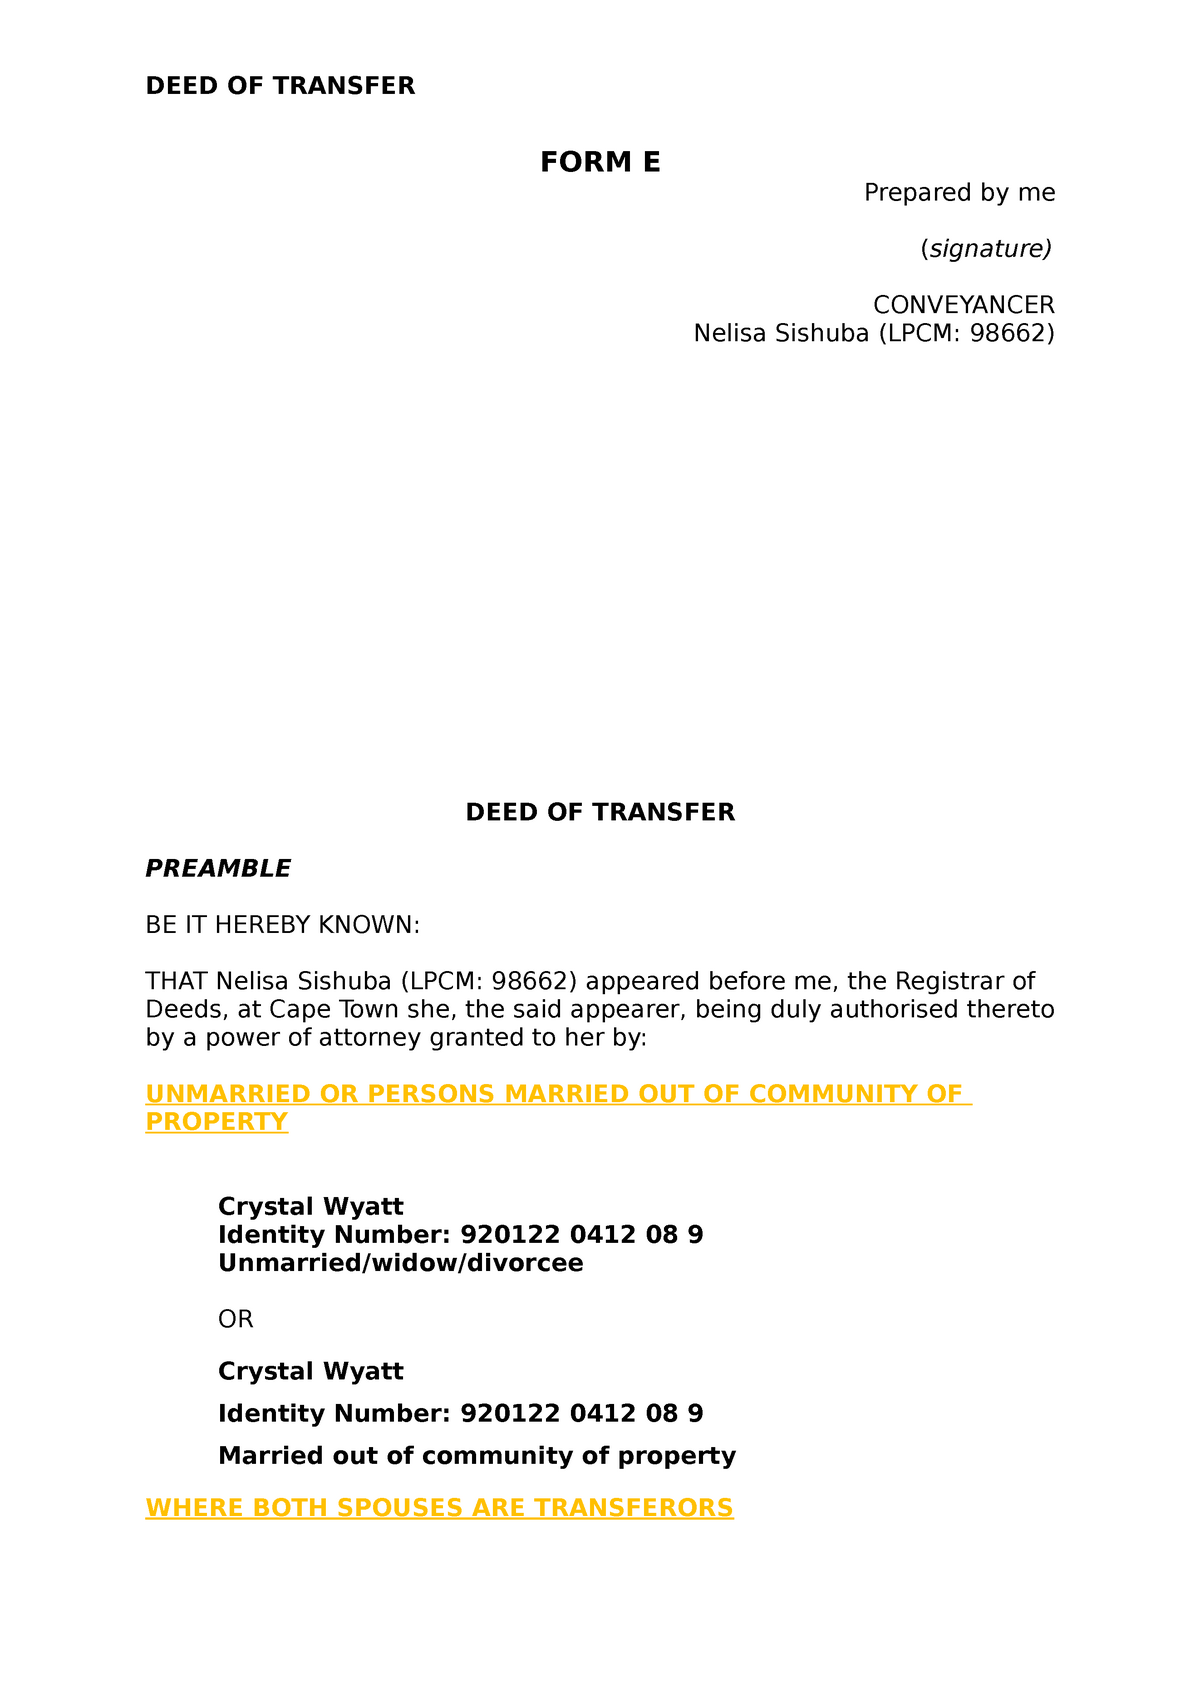 what does a deed of transfer show